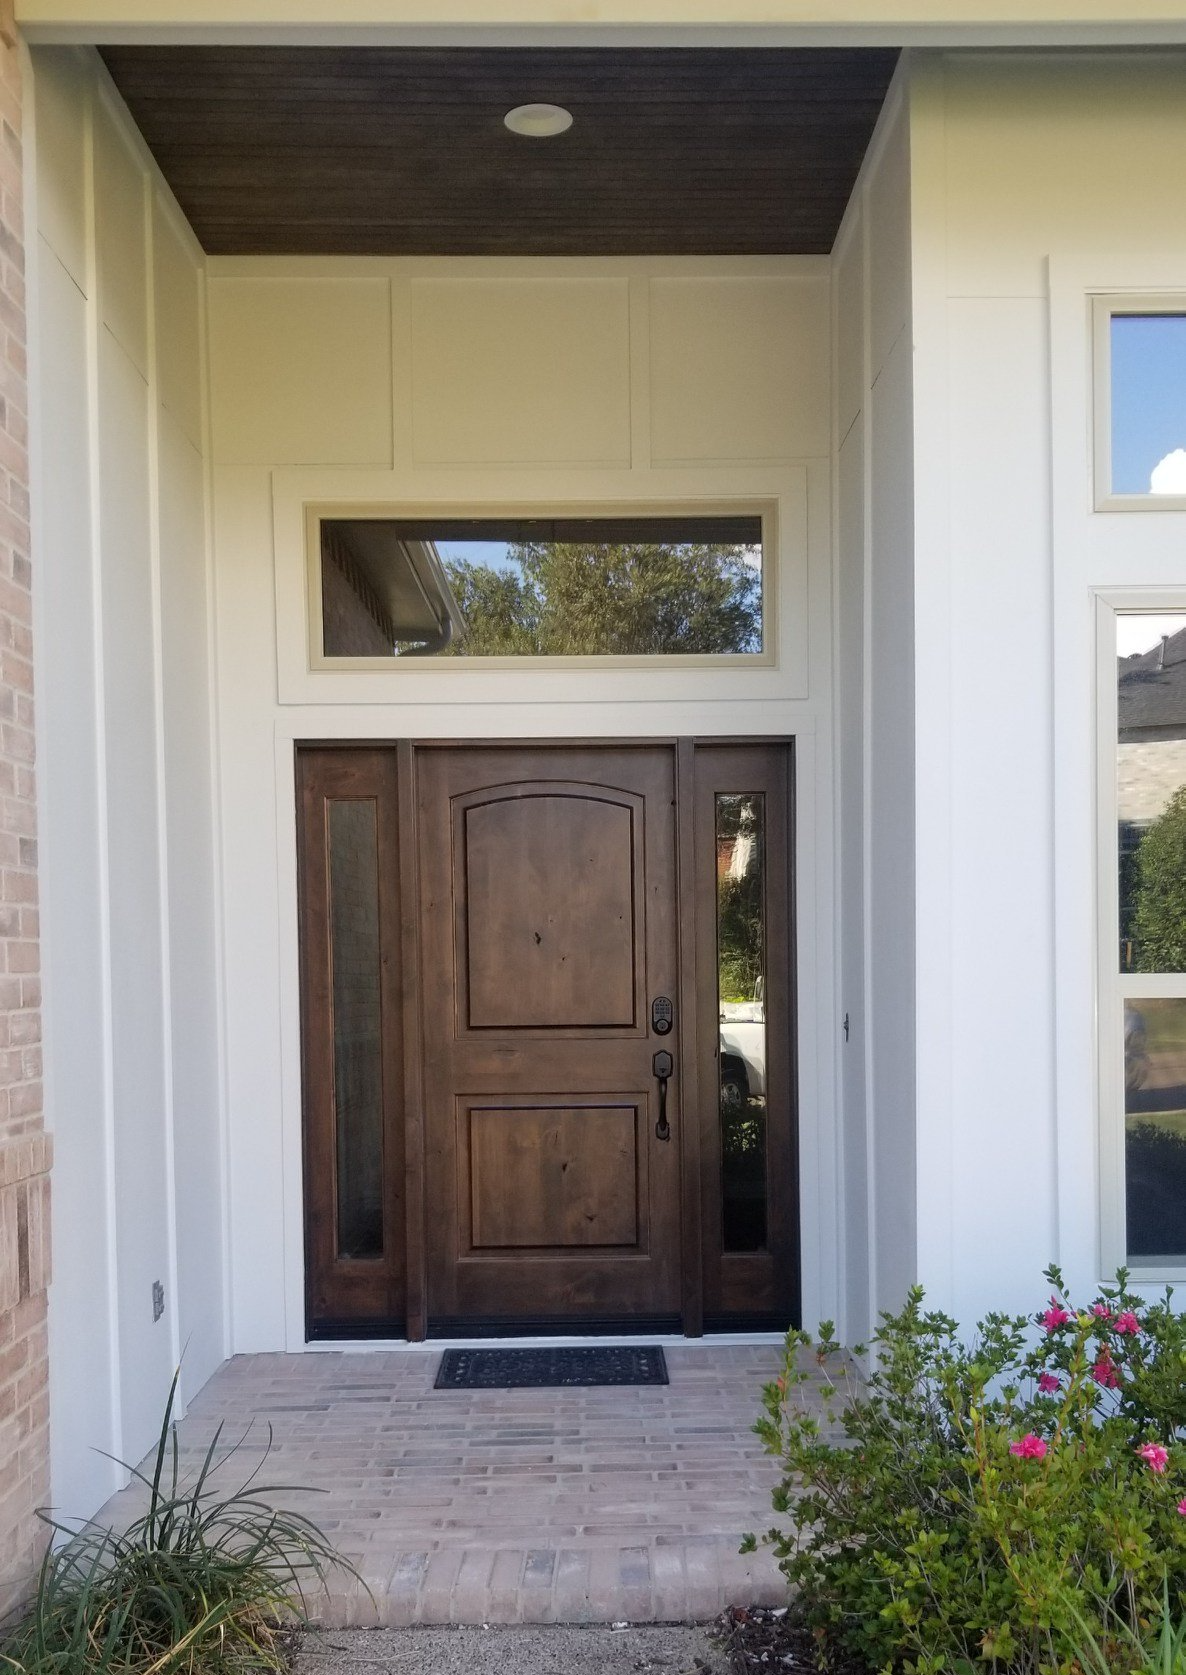 Entry door with transom